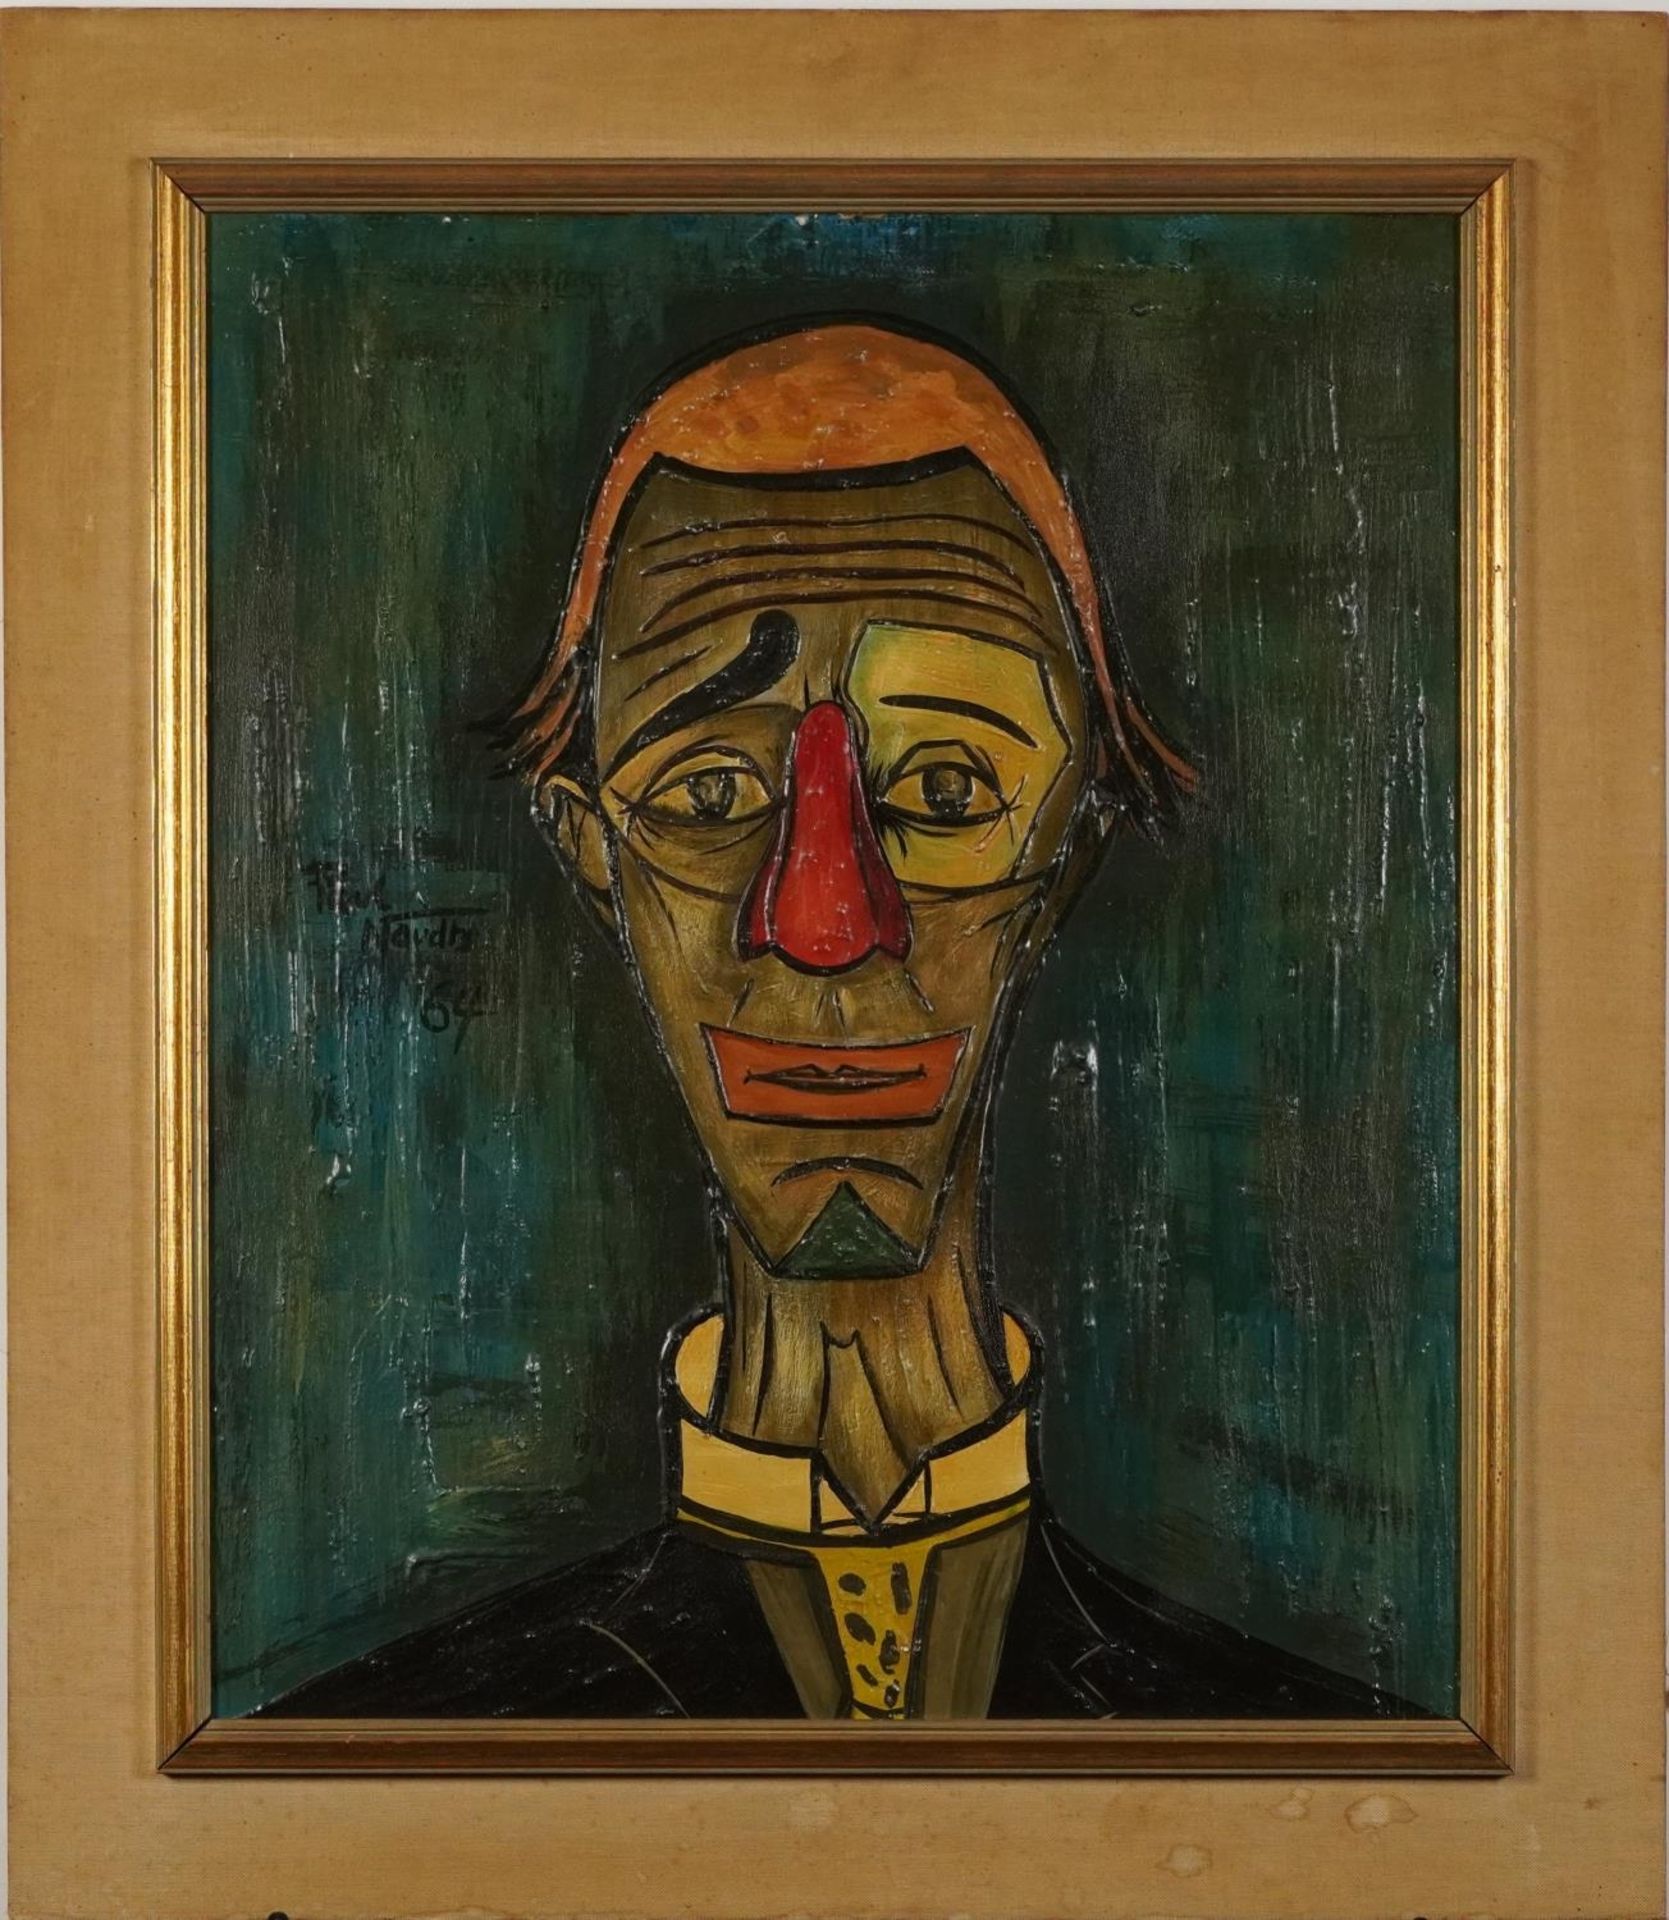 Manner of Bernard Buffet - Head and shoulders portrait of a clown, 1960s oil on board, mounted and - Image 2 of 5